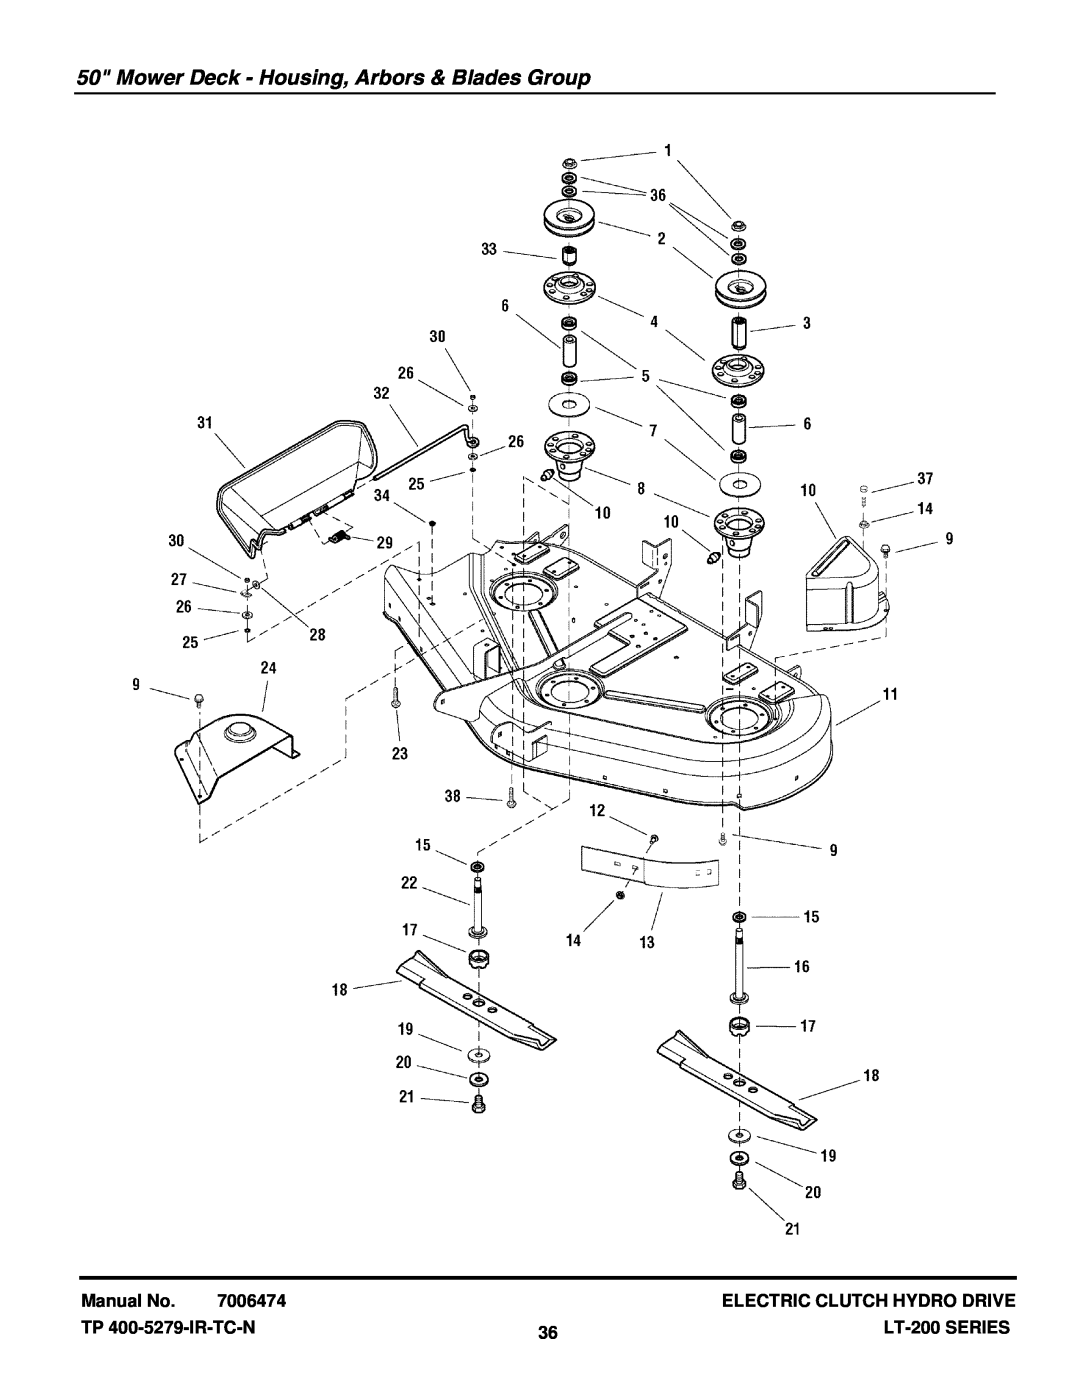 Snapper LT18538 (2690577) Mower Deck - Housing, Arbors & Blades Group, Manual No, 7006474, Electric Clutch Hydro Drive 